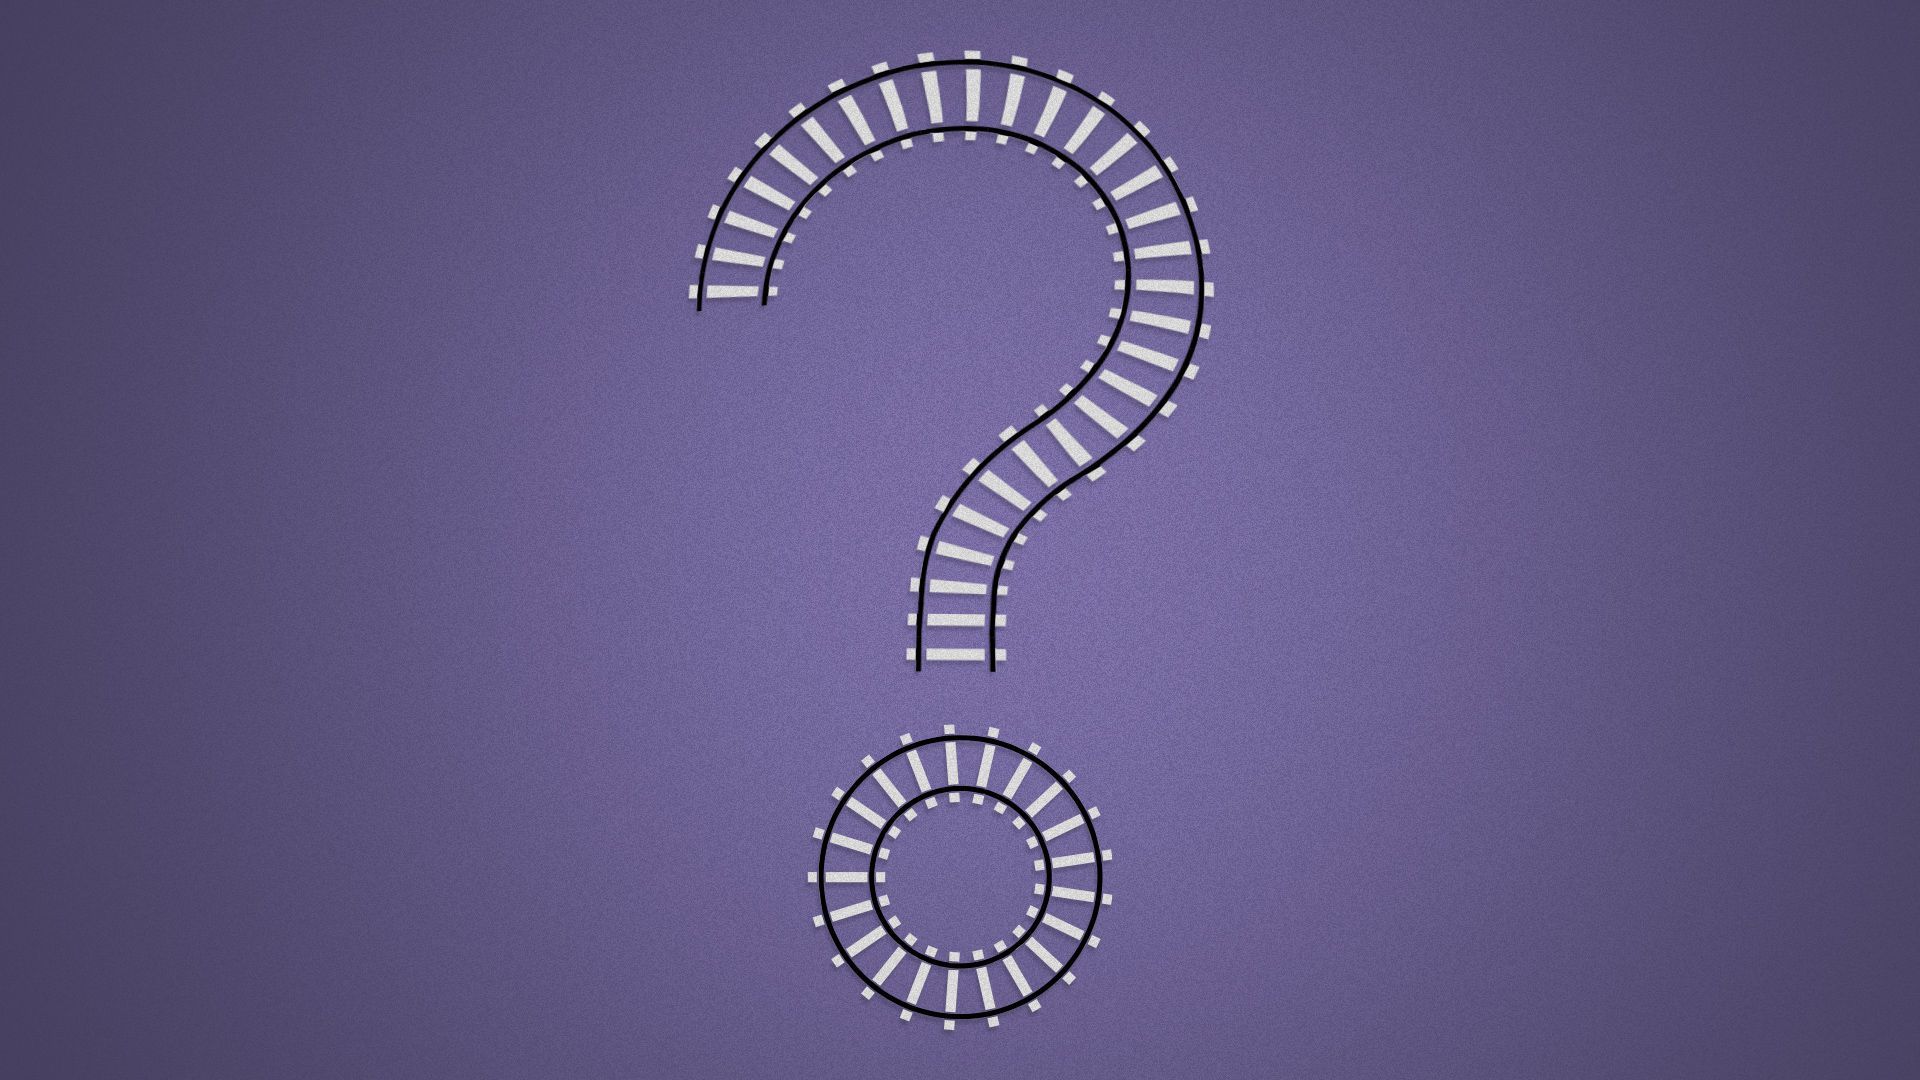 Illustration of a question mark made out of railroad tracks. 